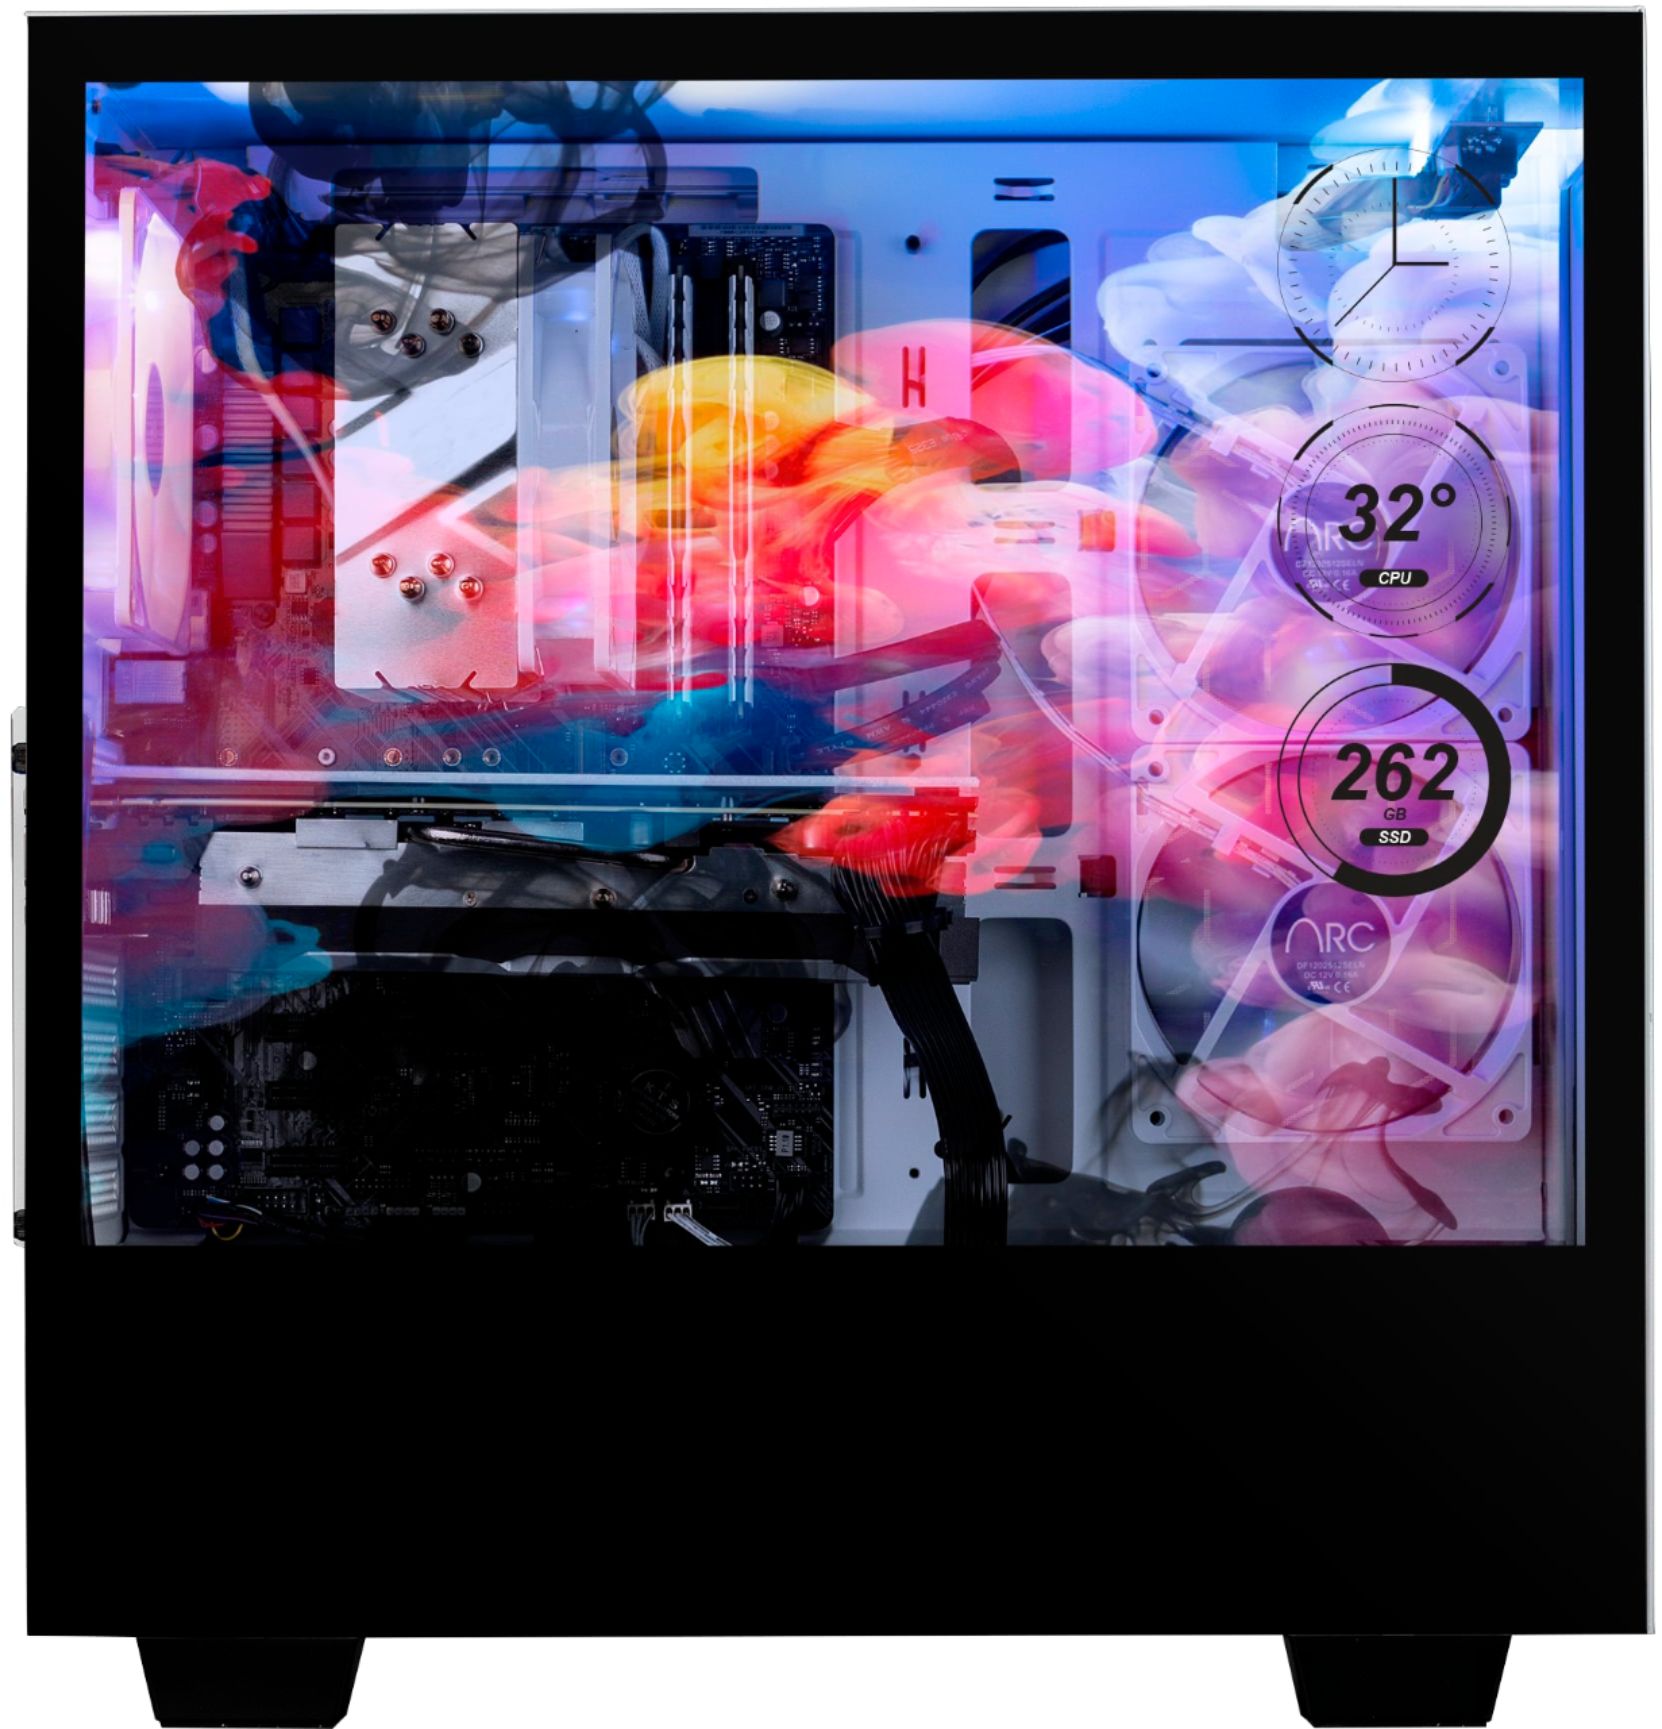 100 off the AWD-IT Candidus 5 Gaming Desktop PC - Available now at